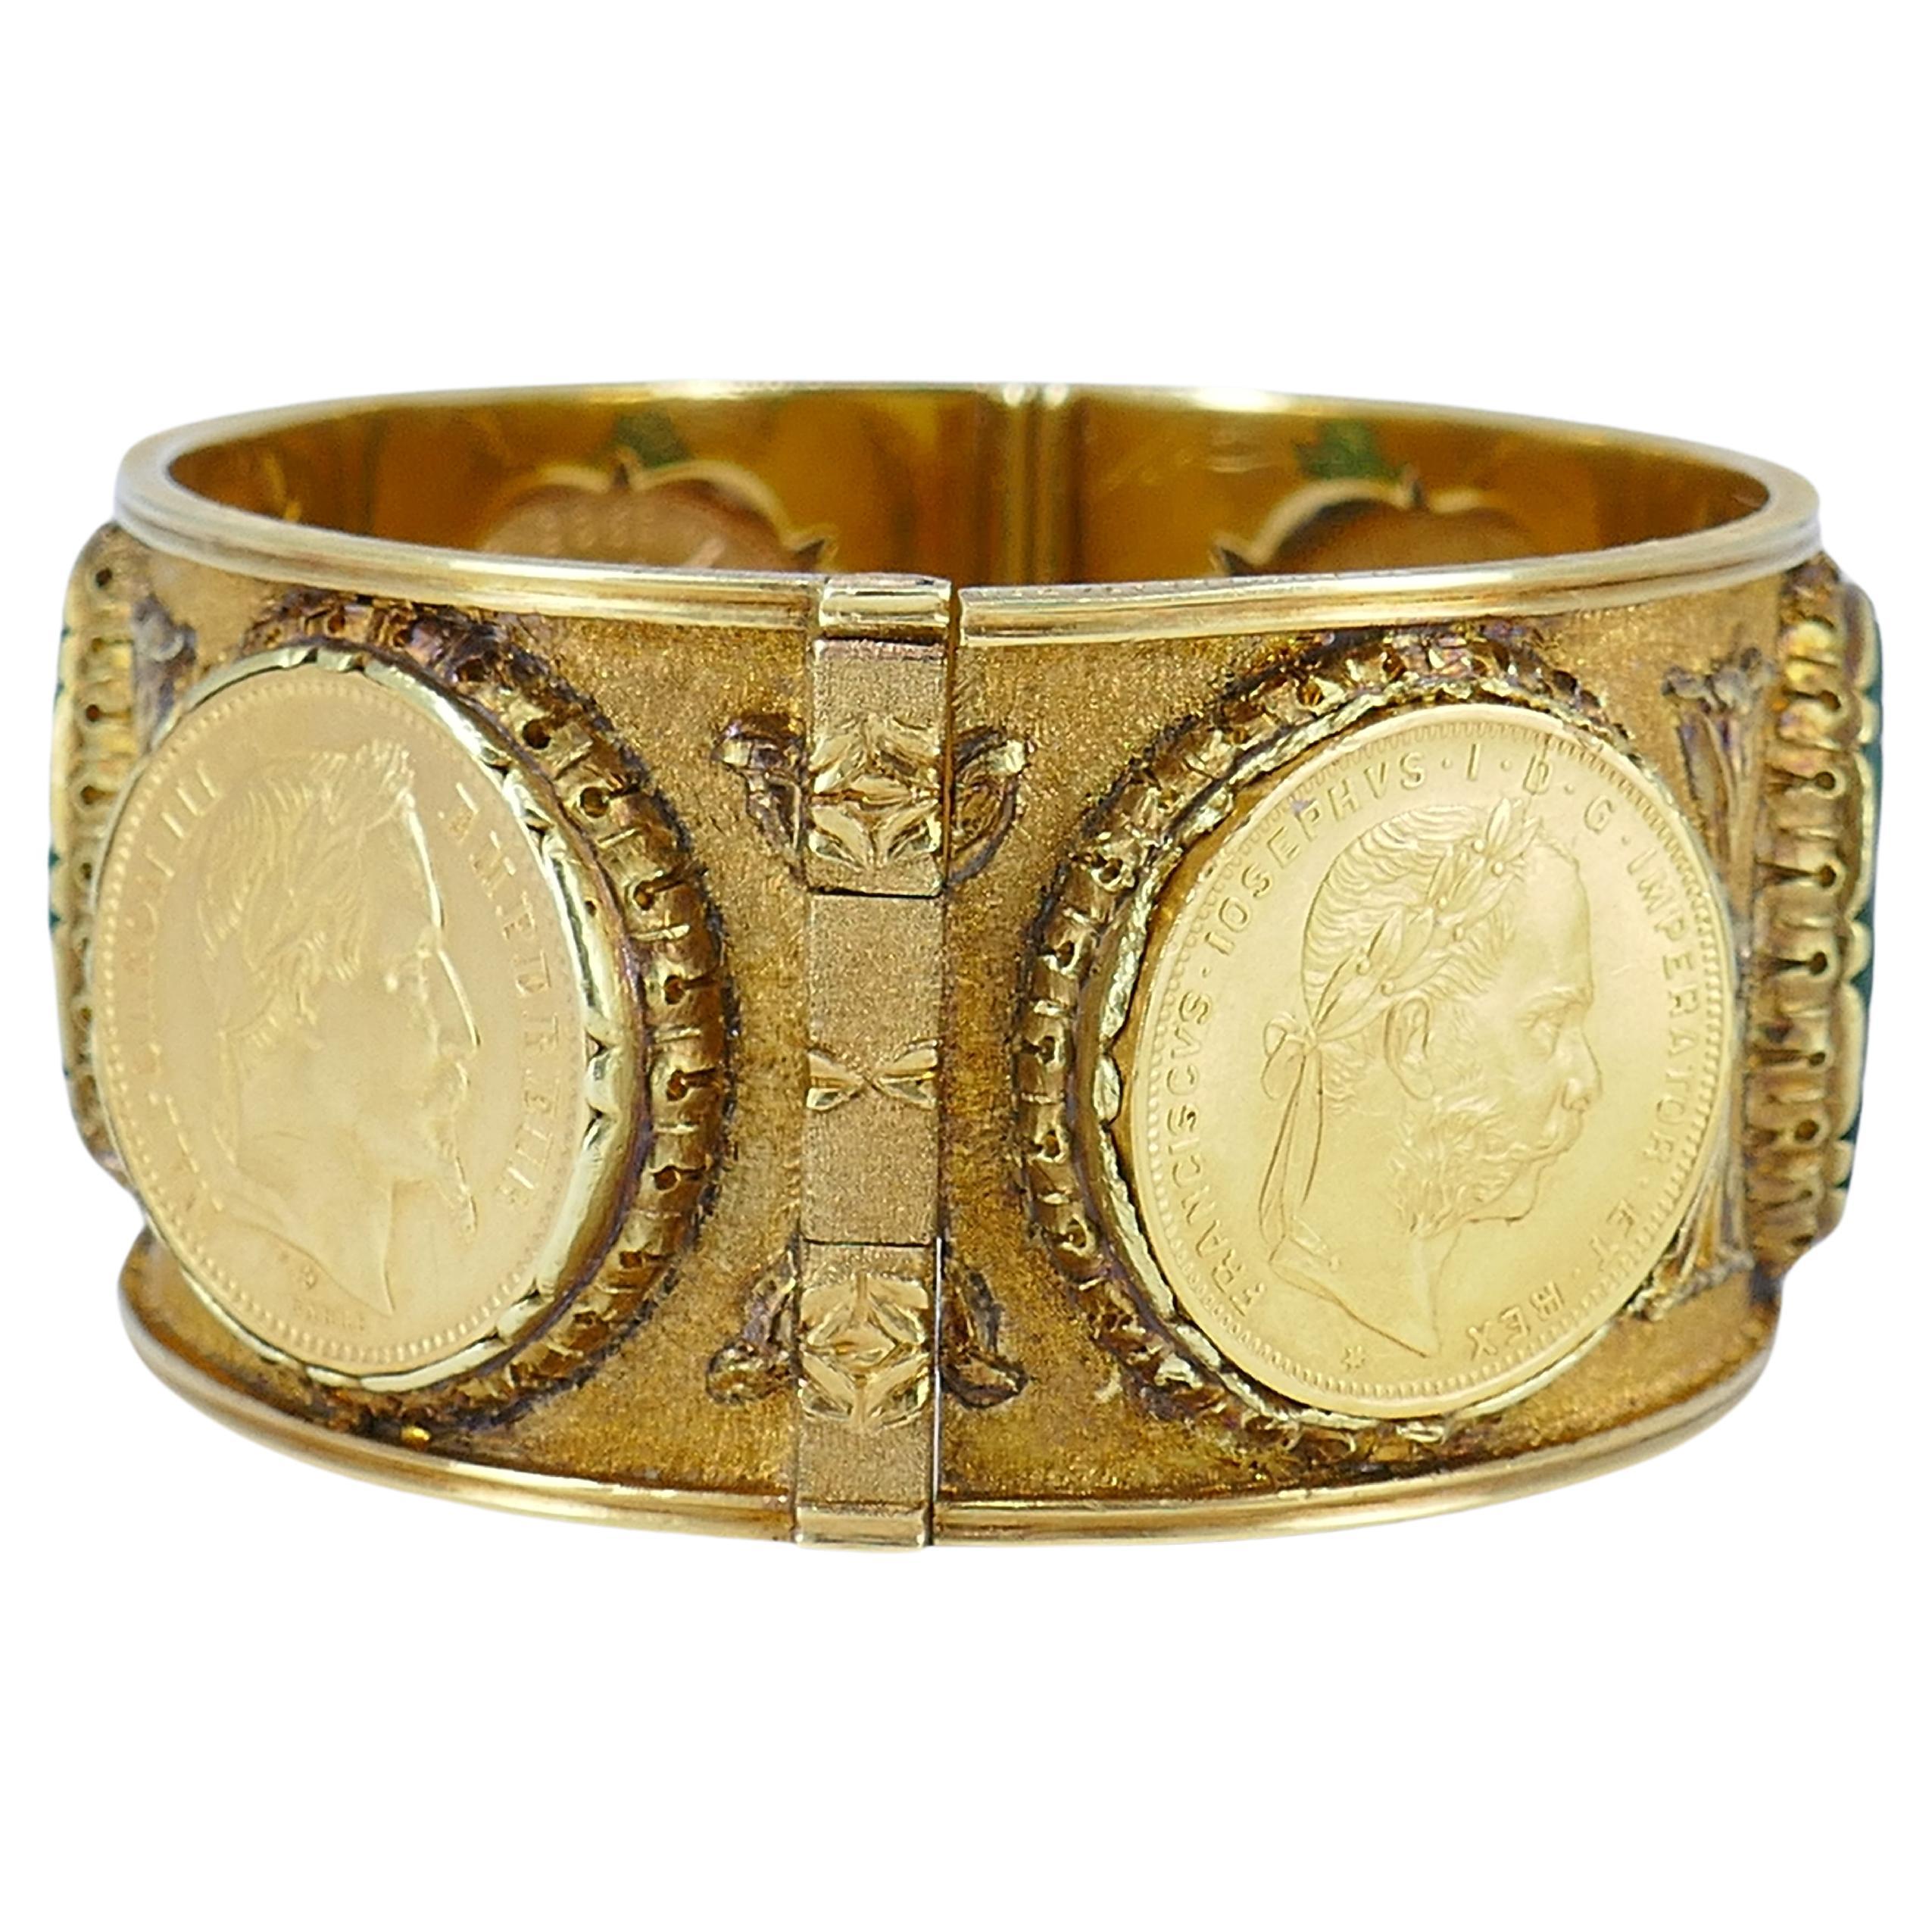 Oval Cut Mario Buccellati Gold Coin Bracelet Carved Jade Vintage Bangle Estate Jewelry For Sale